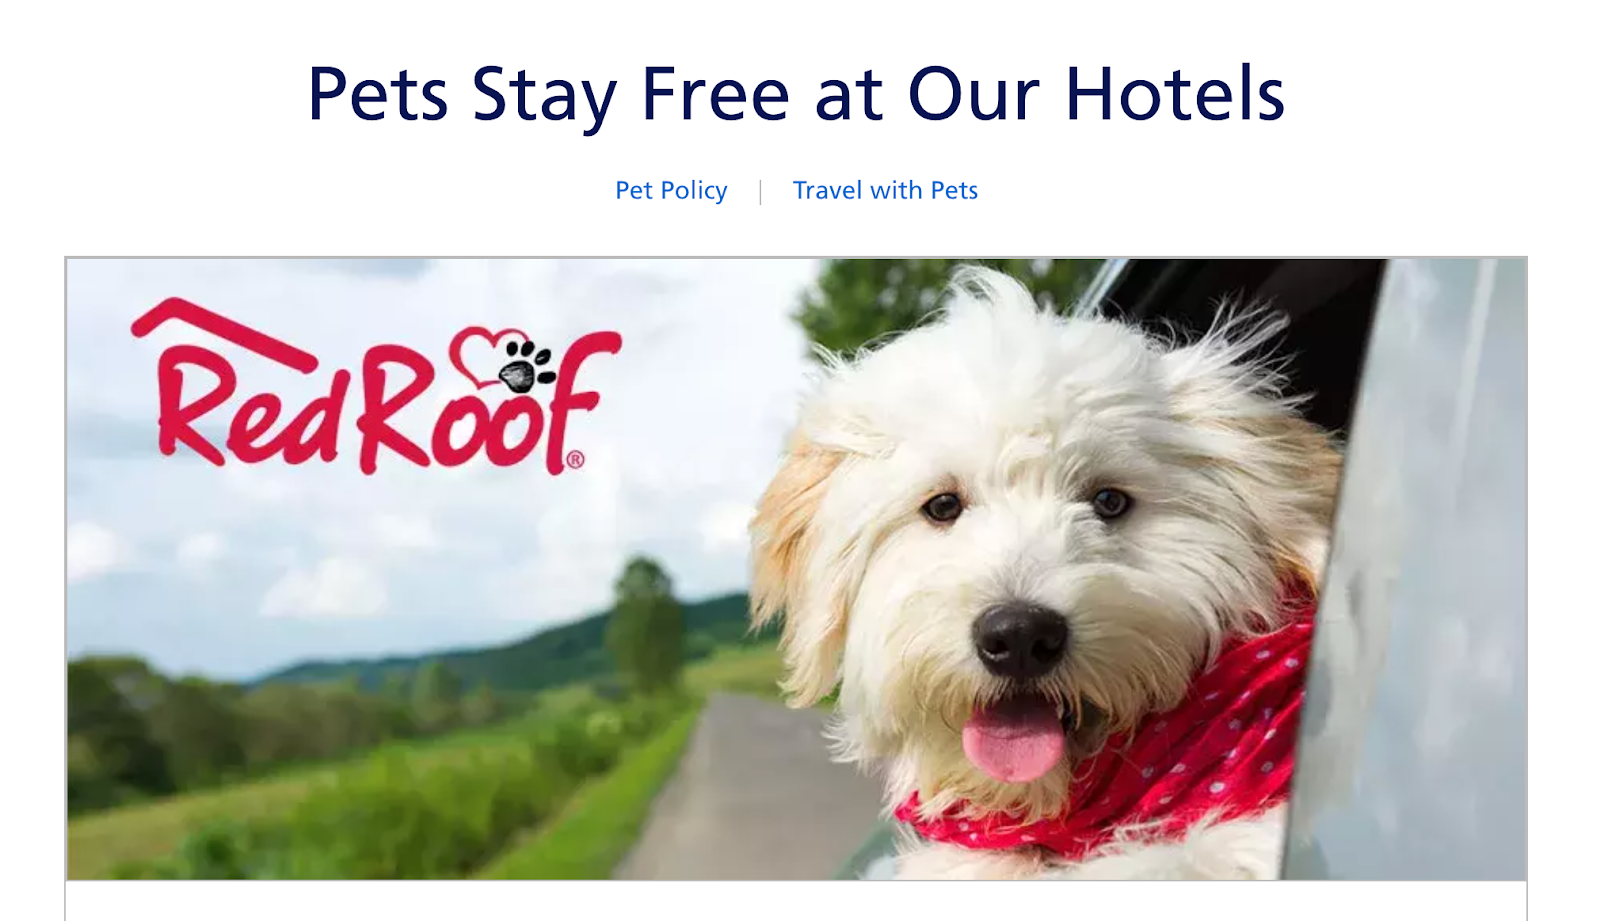 Screenshot of Red Roof Inn's website showing they are pet-friendly